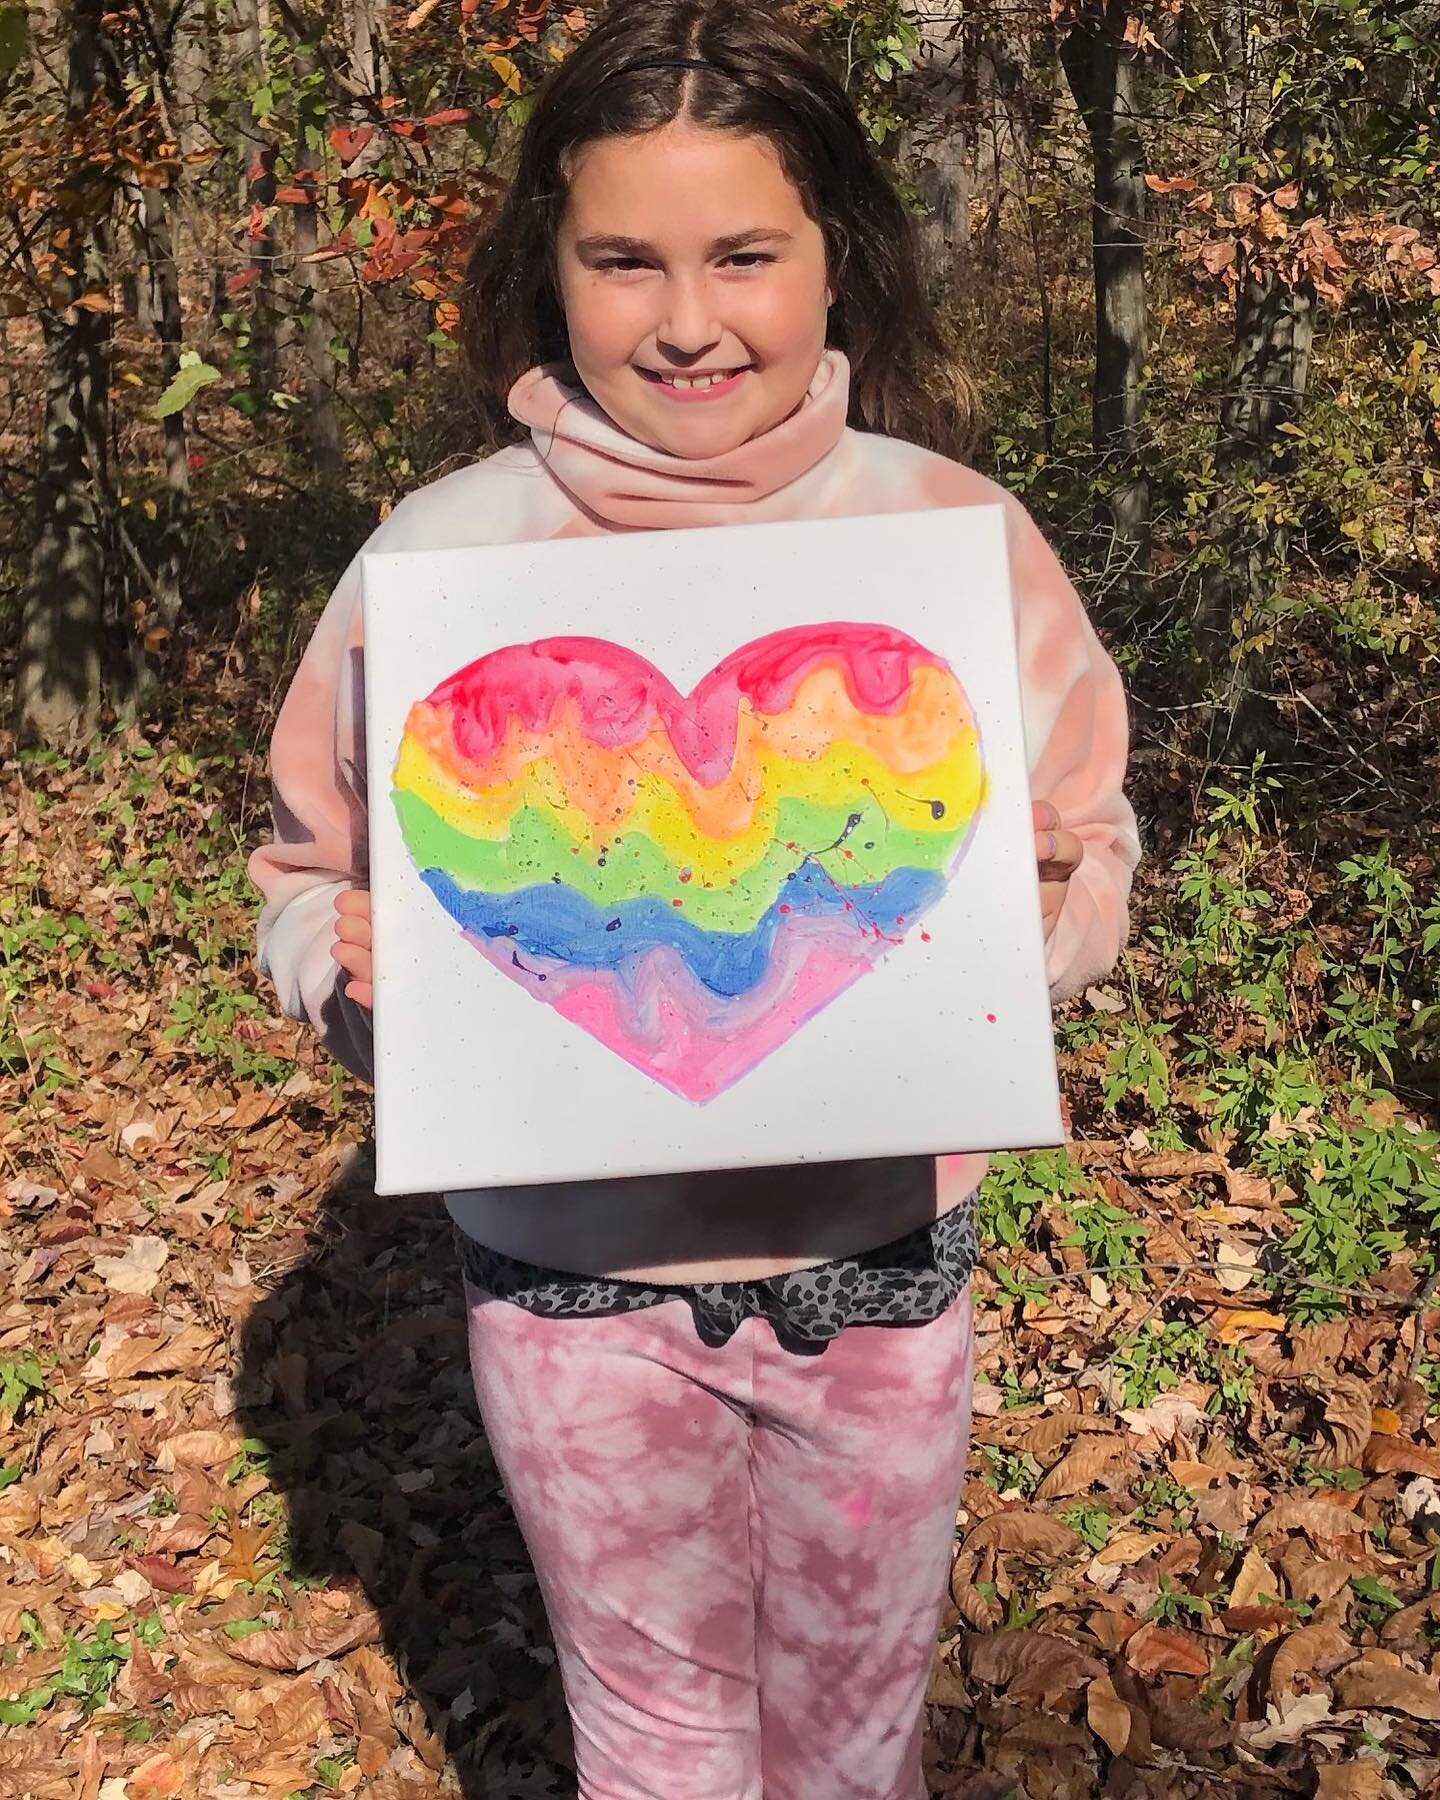 It was a beautiful day for an outdoor art party with a super creative group of girls! Are you as impressed with their creative designs as we are?